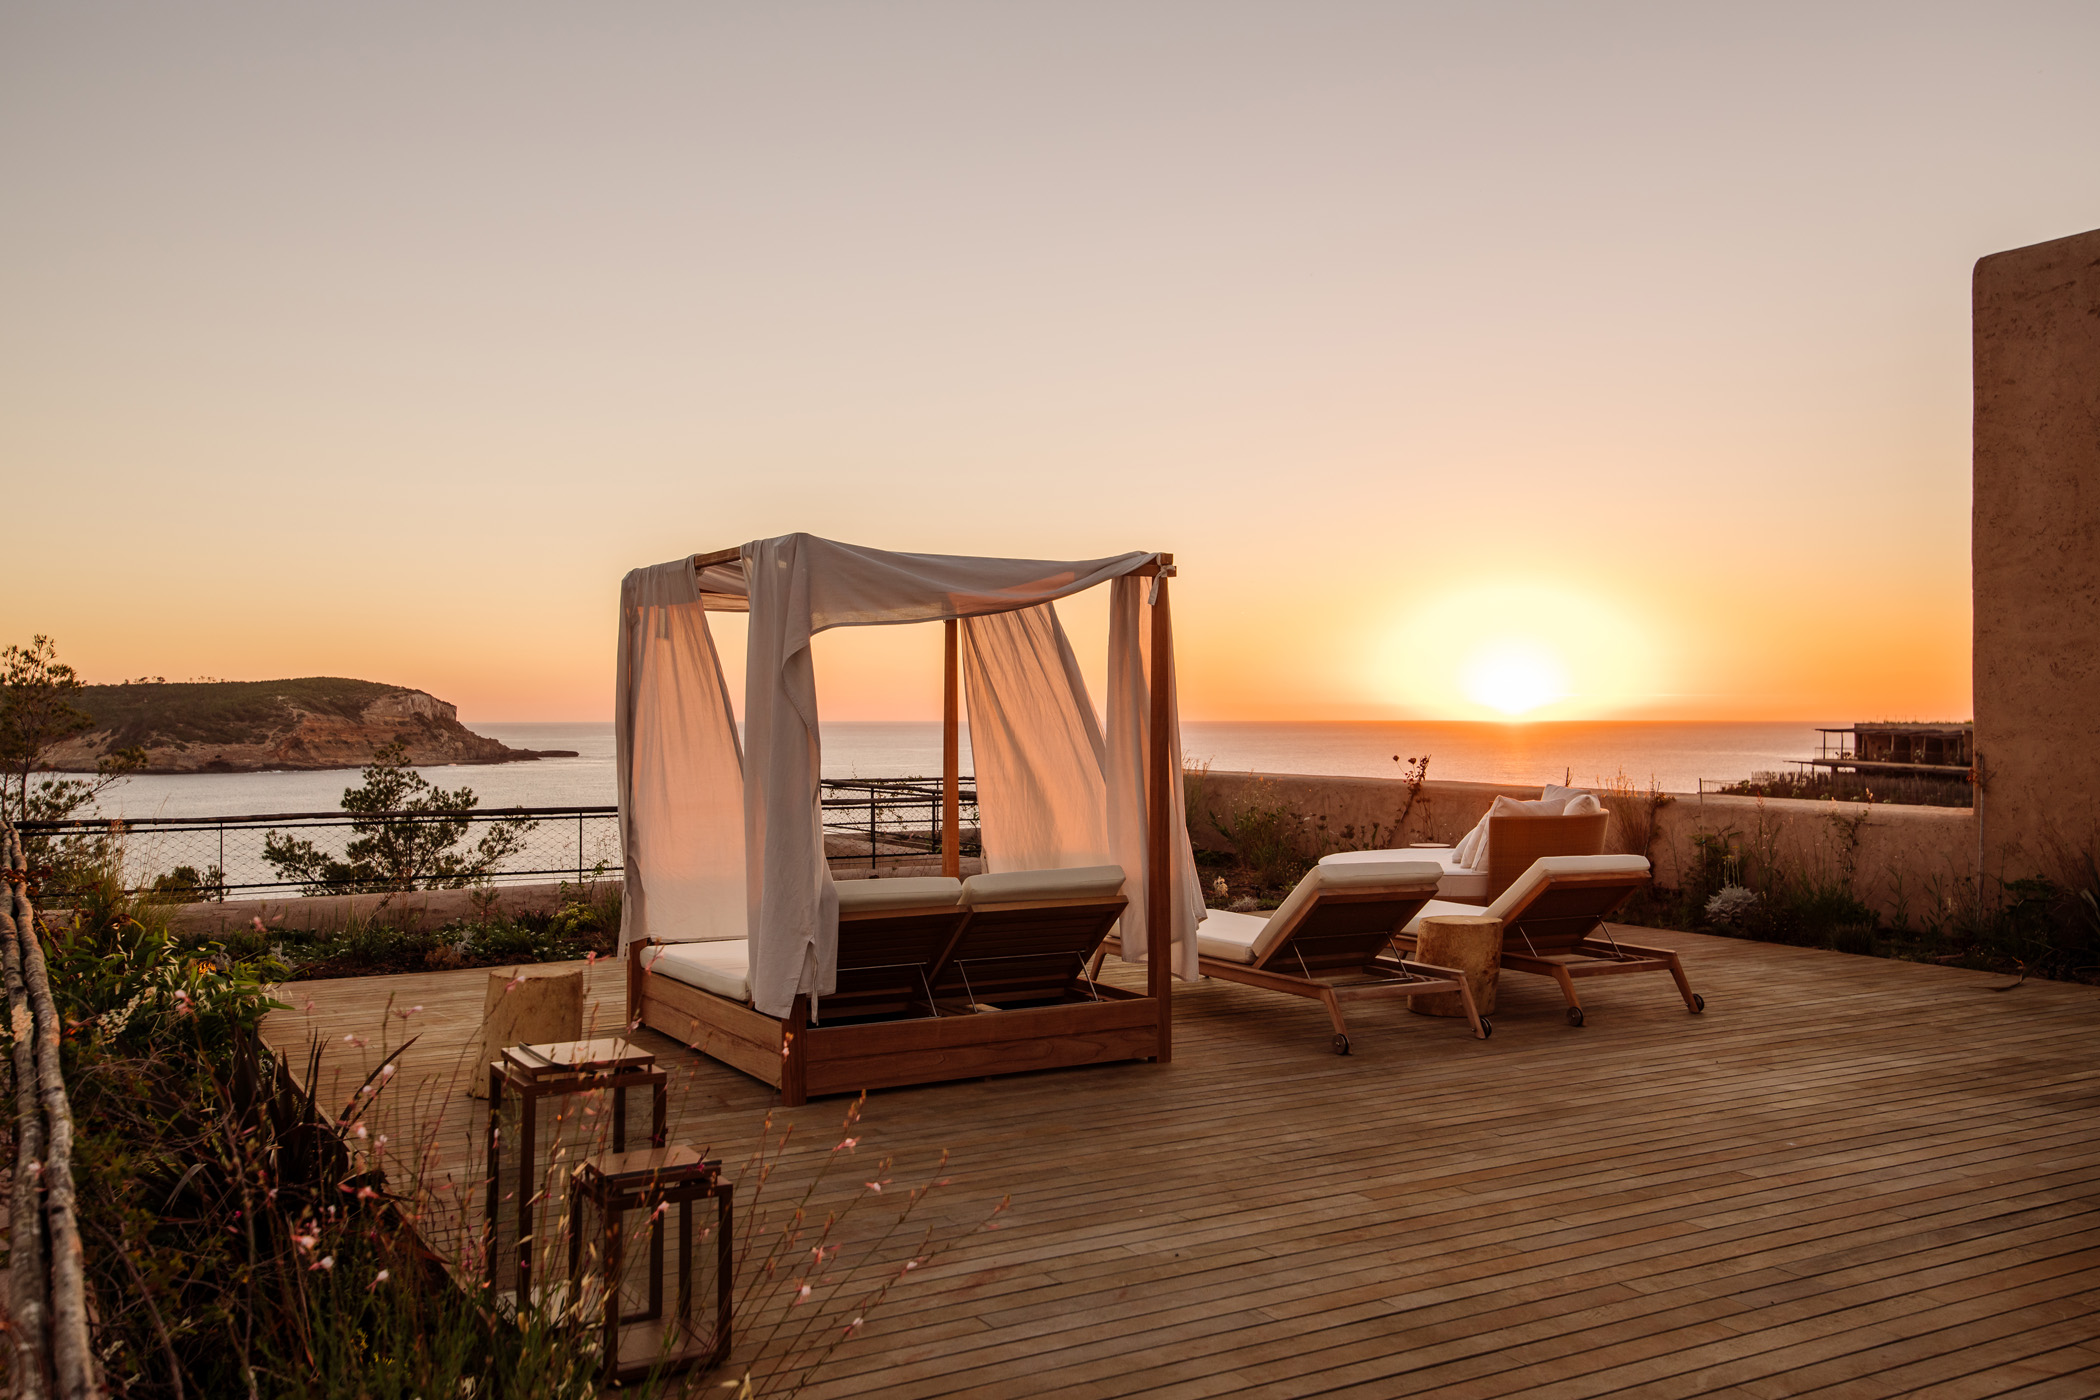 Day bed of a luxury rental villa in Ibiza overlooking the sun as it dips into the ocean